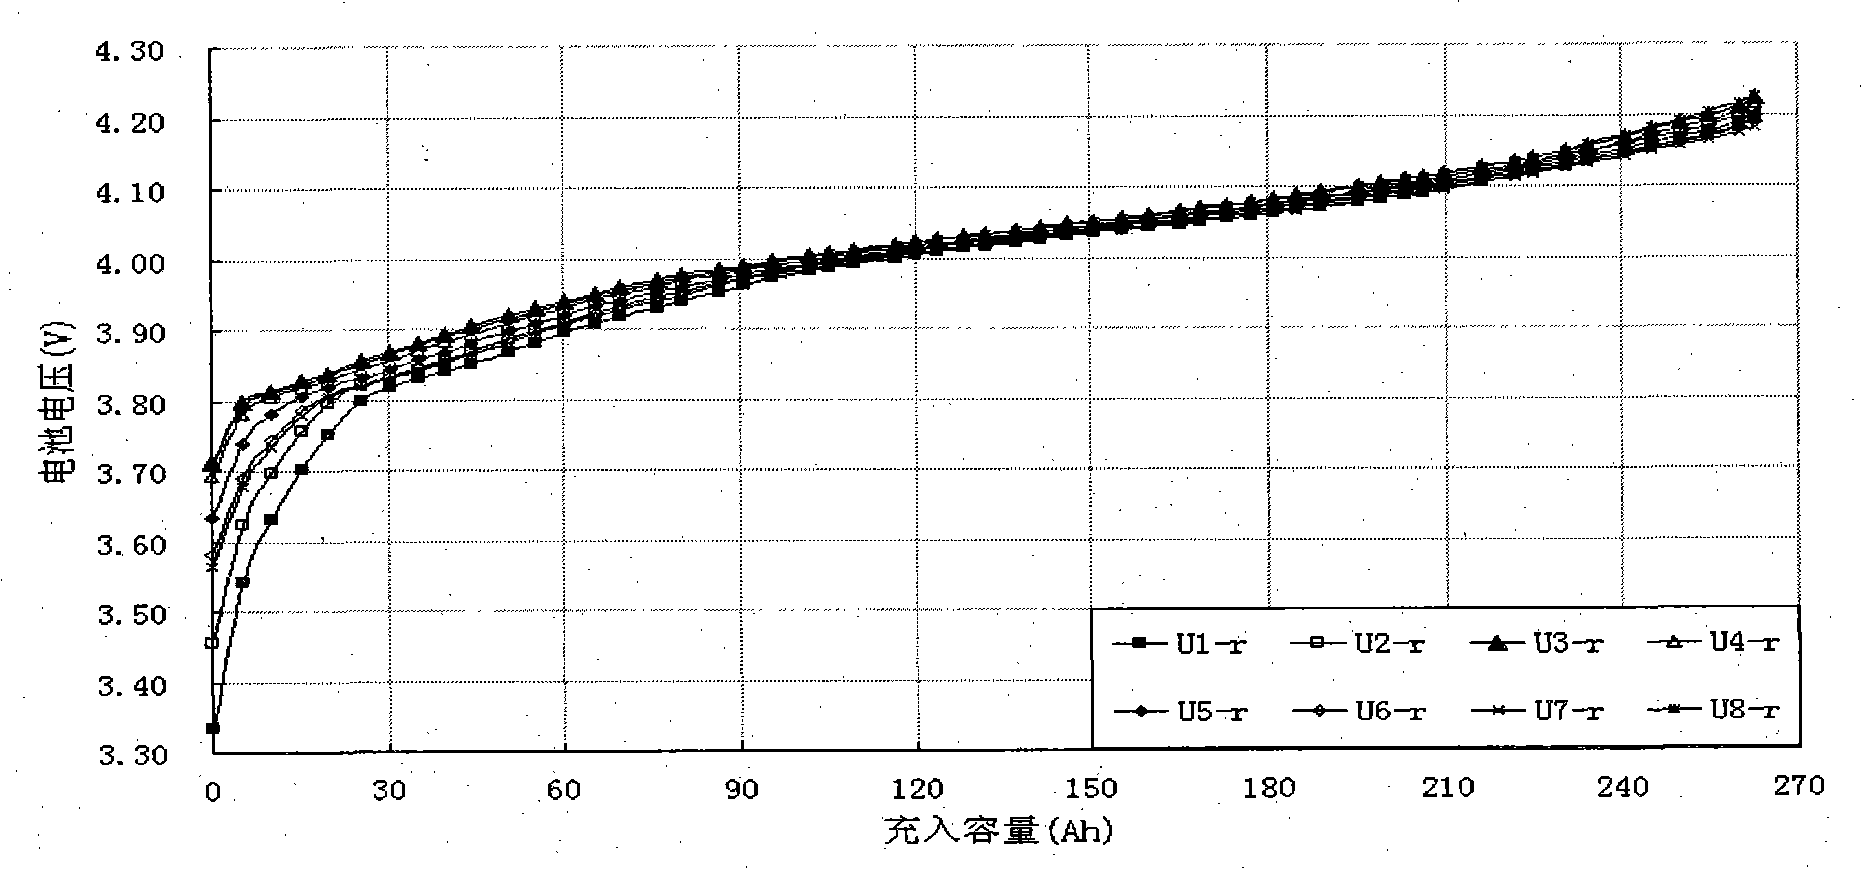 Method for evaluating consistency of battery pack